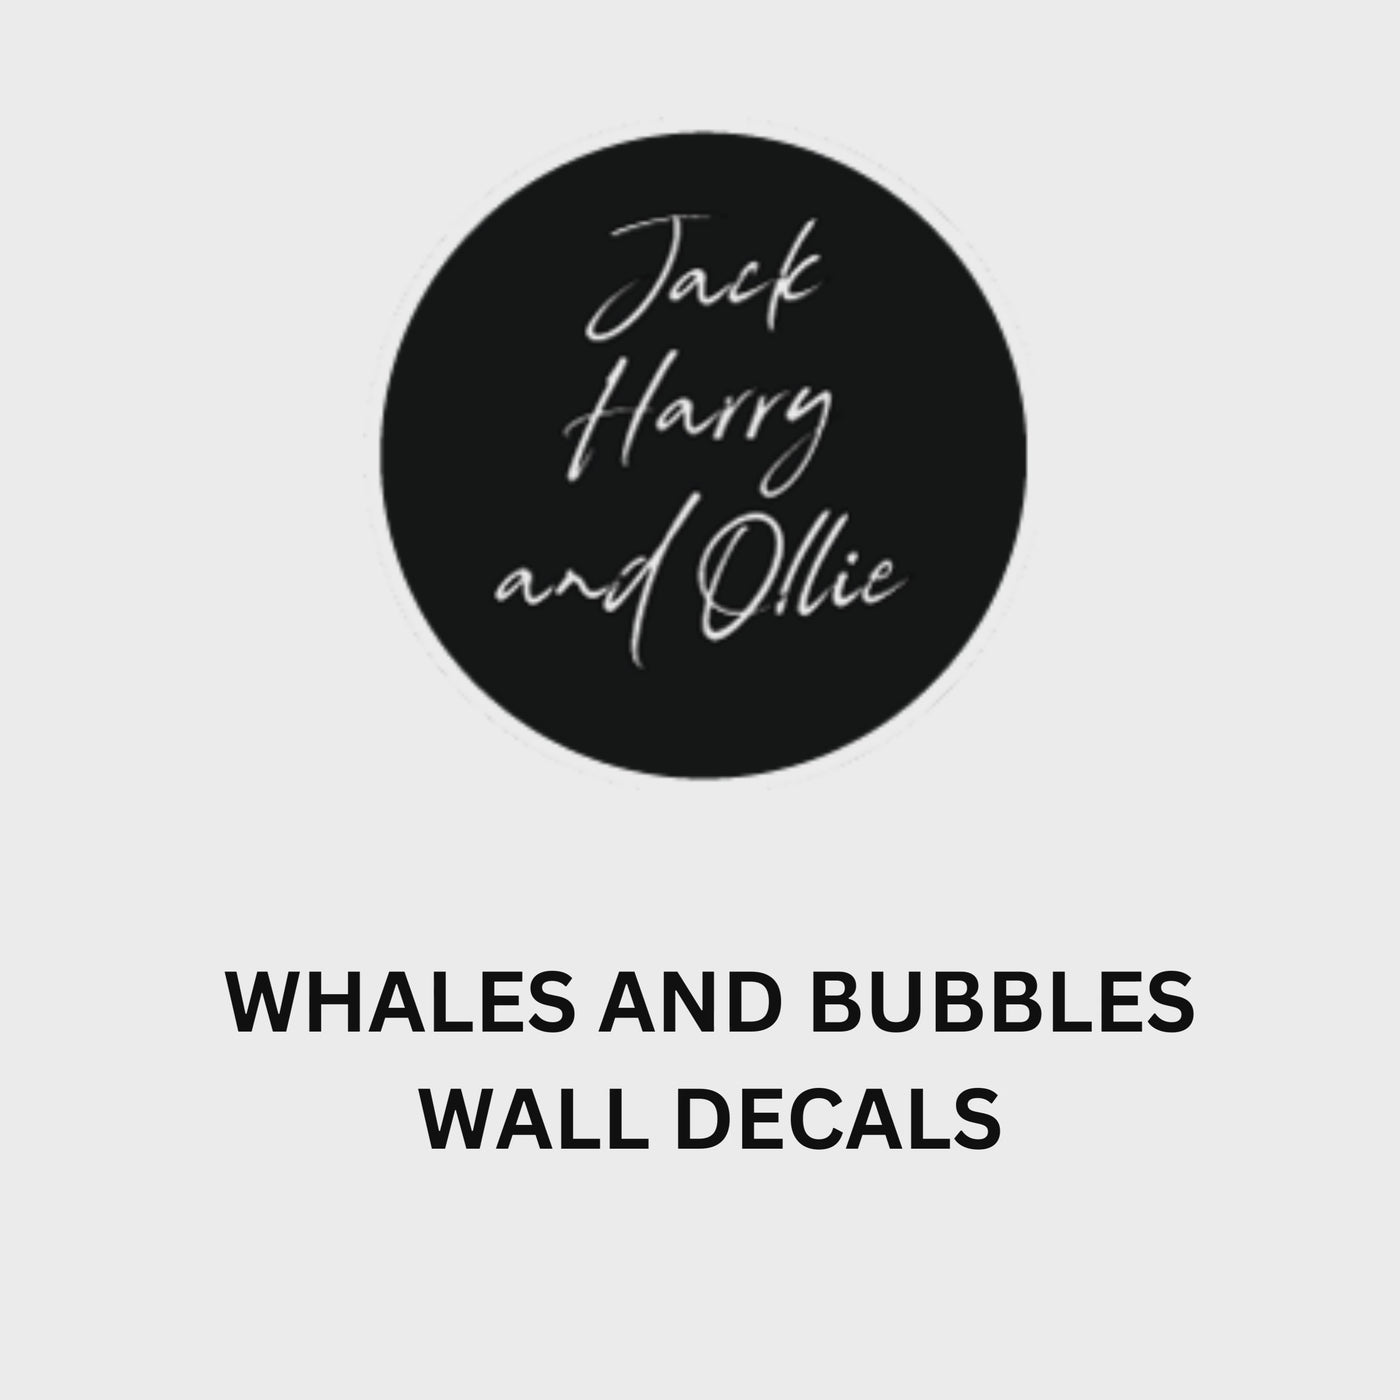 Whales and Bubbles Wall Decals